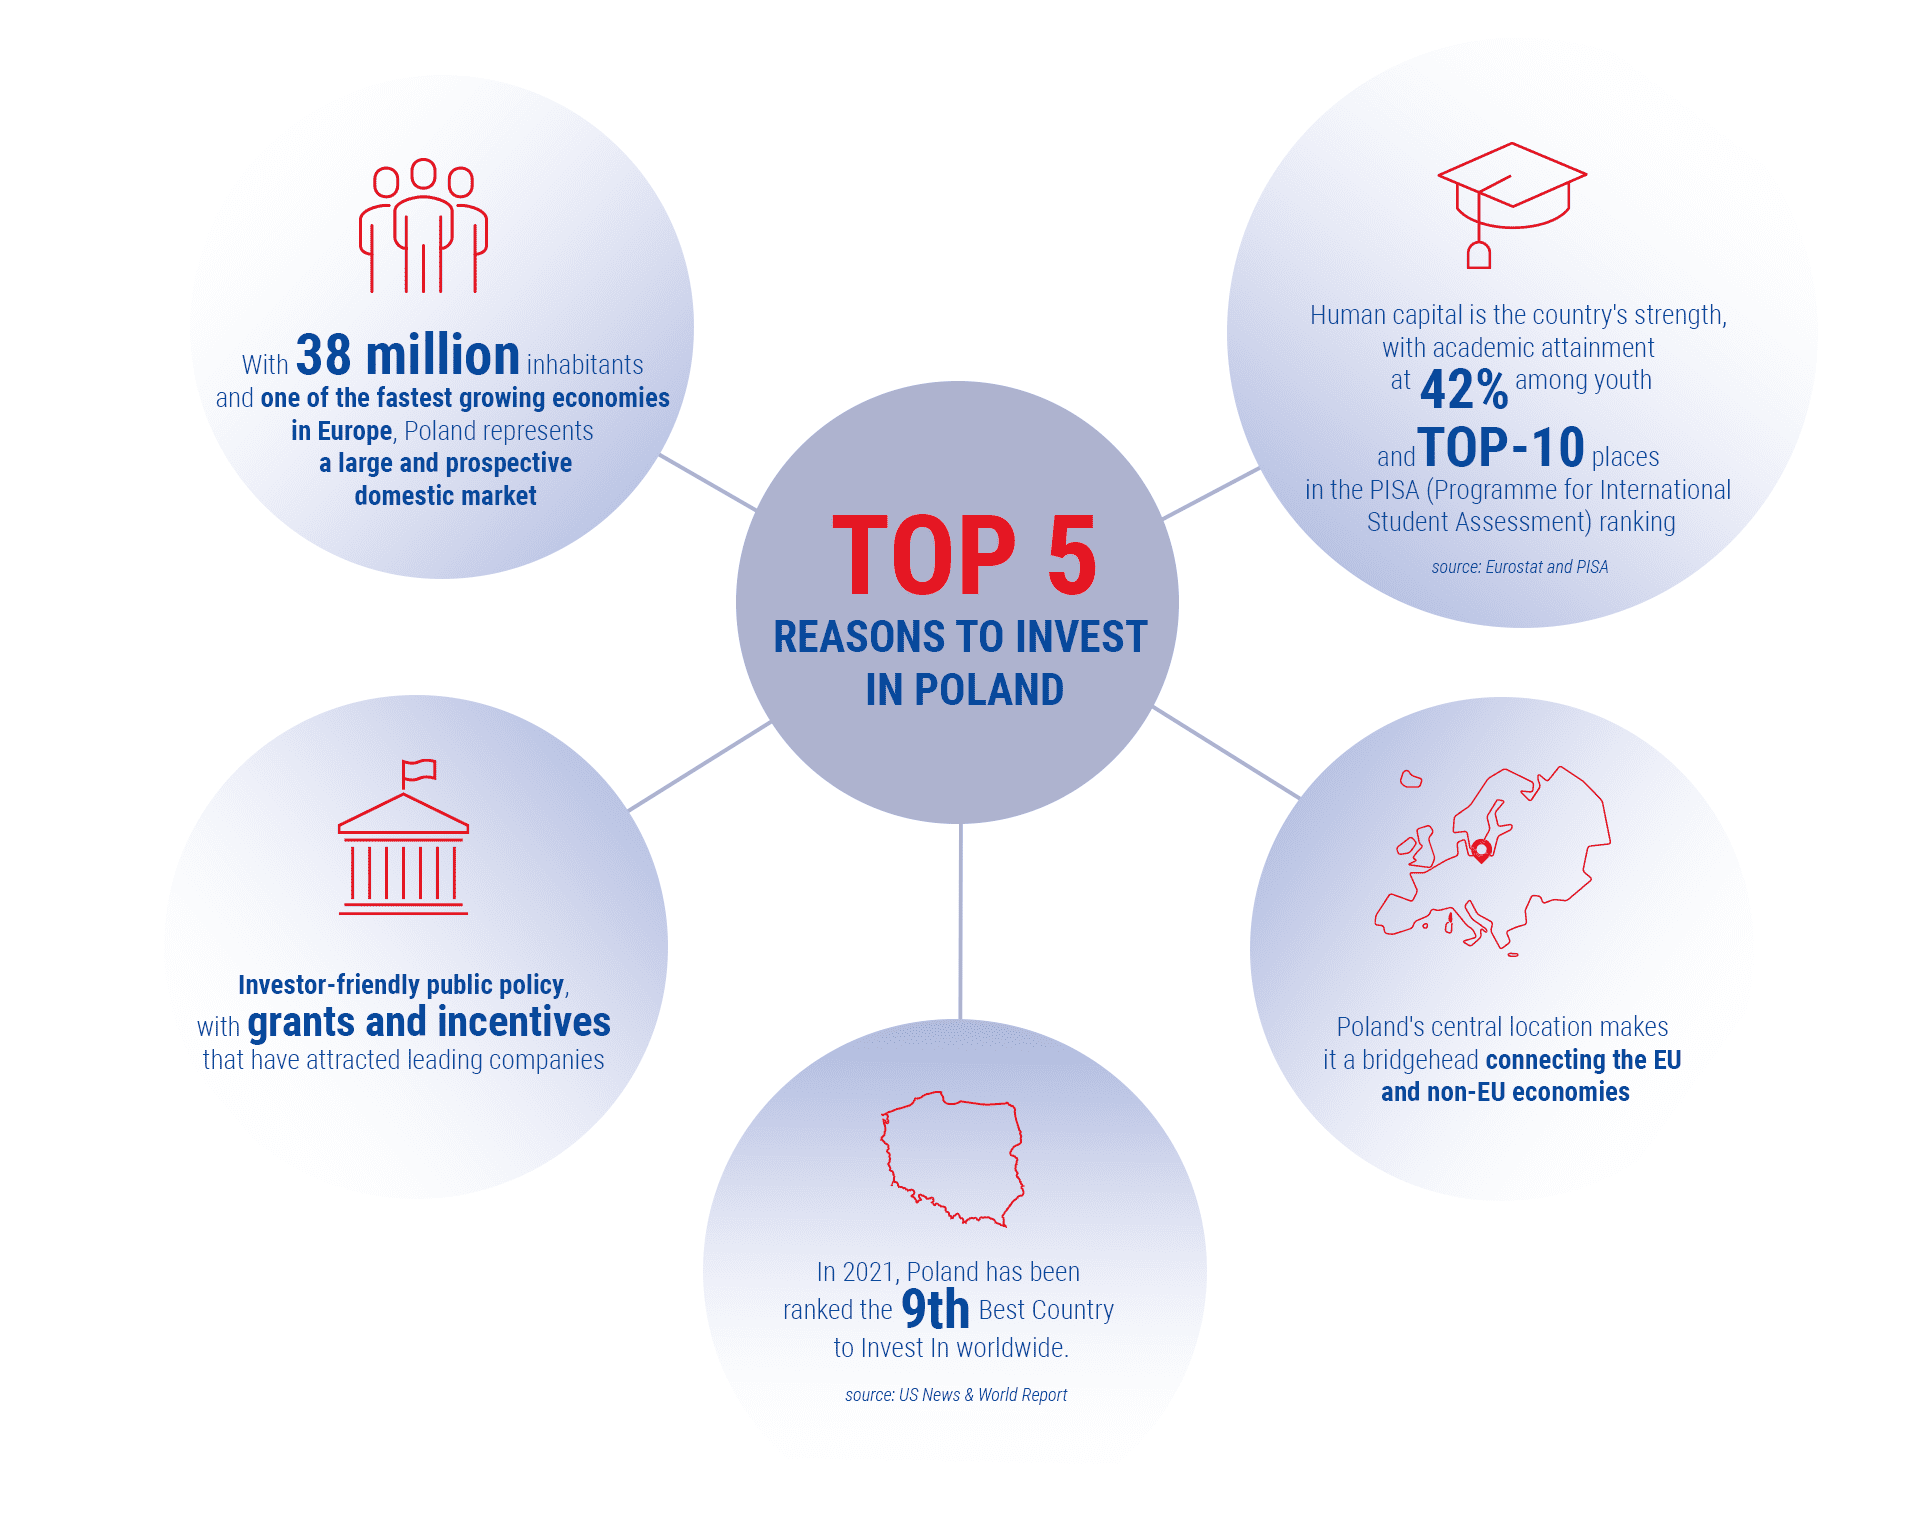 Infographics with a title "Top 5 reasons to invest in Poland". 1. With 38 million inhabitants and one of the fastest growing economies in Europe, Poland represents a large and prospective domestic market. 2. Human capital is the country's strength with academic attainment at 42% among youth and TOP10 places in the PISA (Programme for International Student Assessment) ranking. 3. Poland's central location makes it a bridgehead connecting the EU and non-EU economies. 4. In 2021, Poland has been ranked the 9th Best Country to Invest in worldwide. 5. Investor-friendly public policy with grants and incentives that have attracted leading companies.